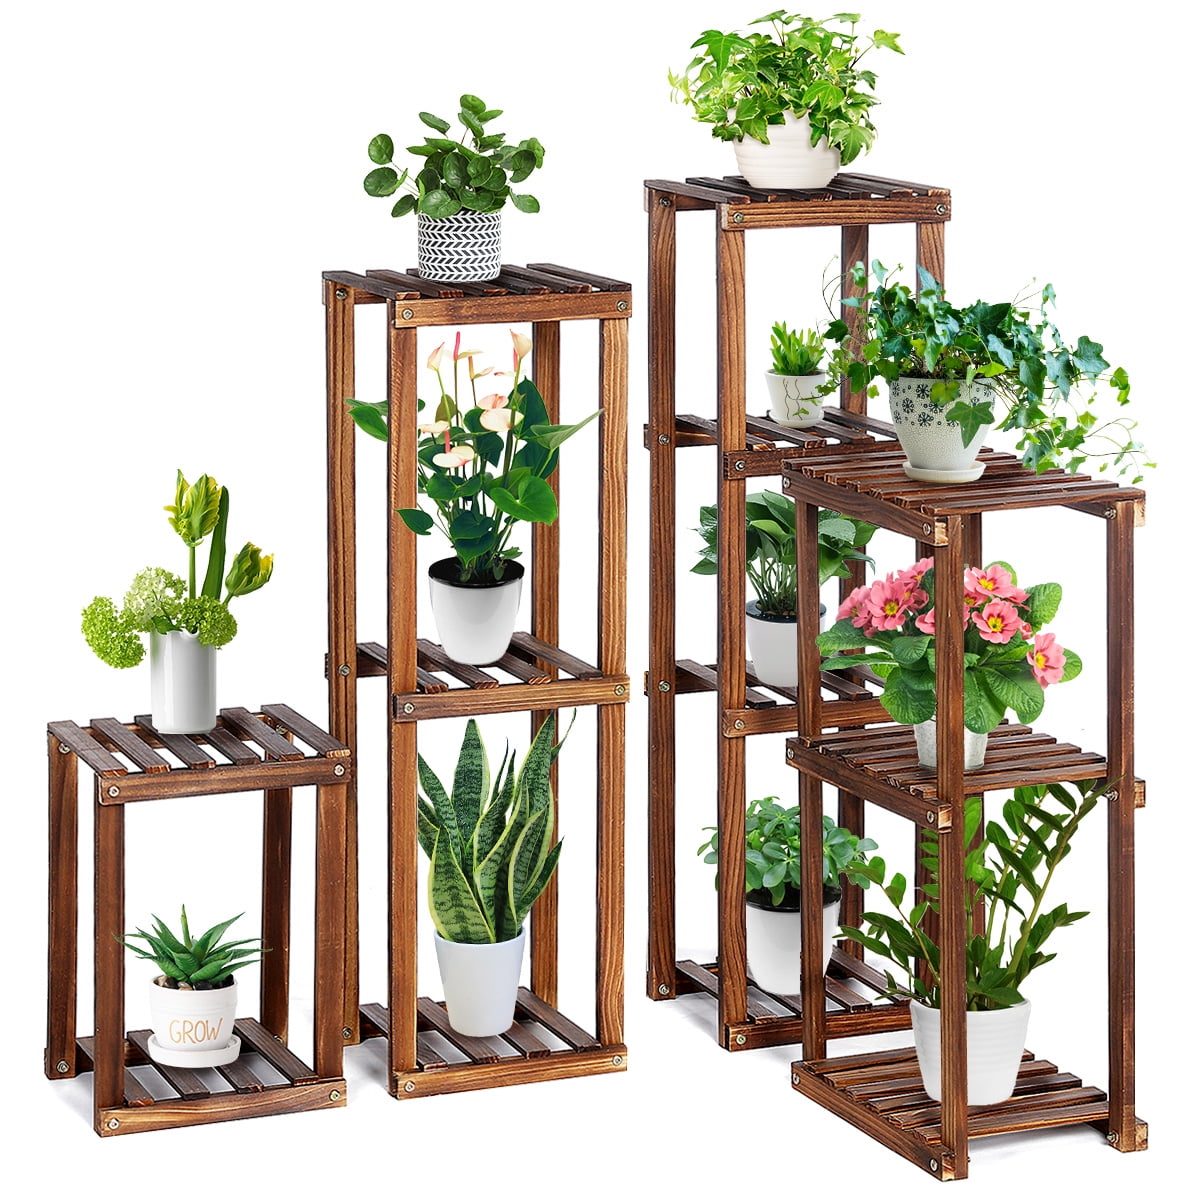 Steady Vertical Carbonized Shelves for Patio Livingroom Balcony Garden Yard TOOCA Wood Plant Stands Indoor Stylish Outdoor Plant Display Rack Holder 3-Tier Corner Plant Flower Pot Stand 